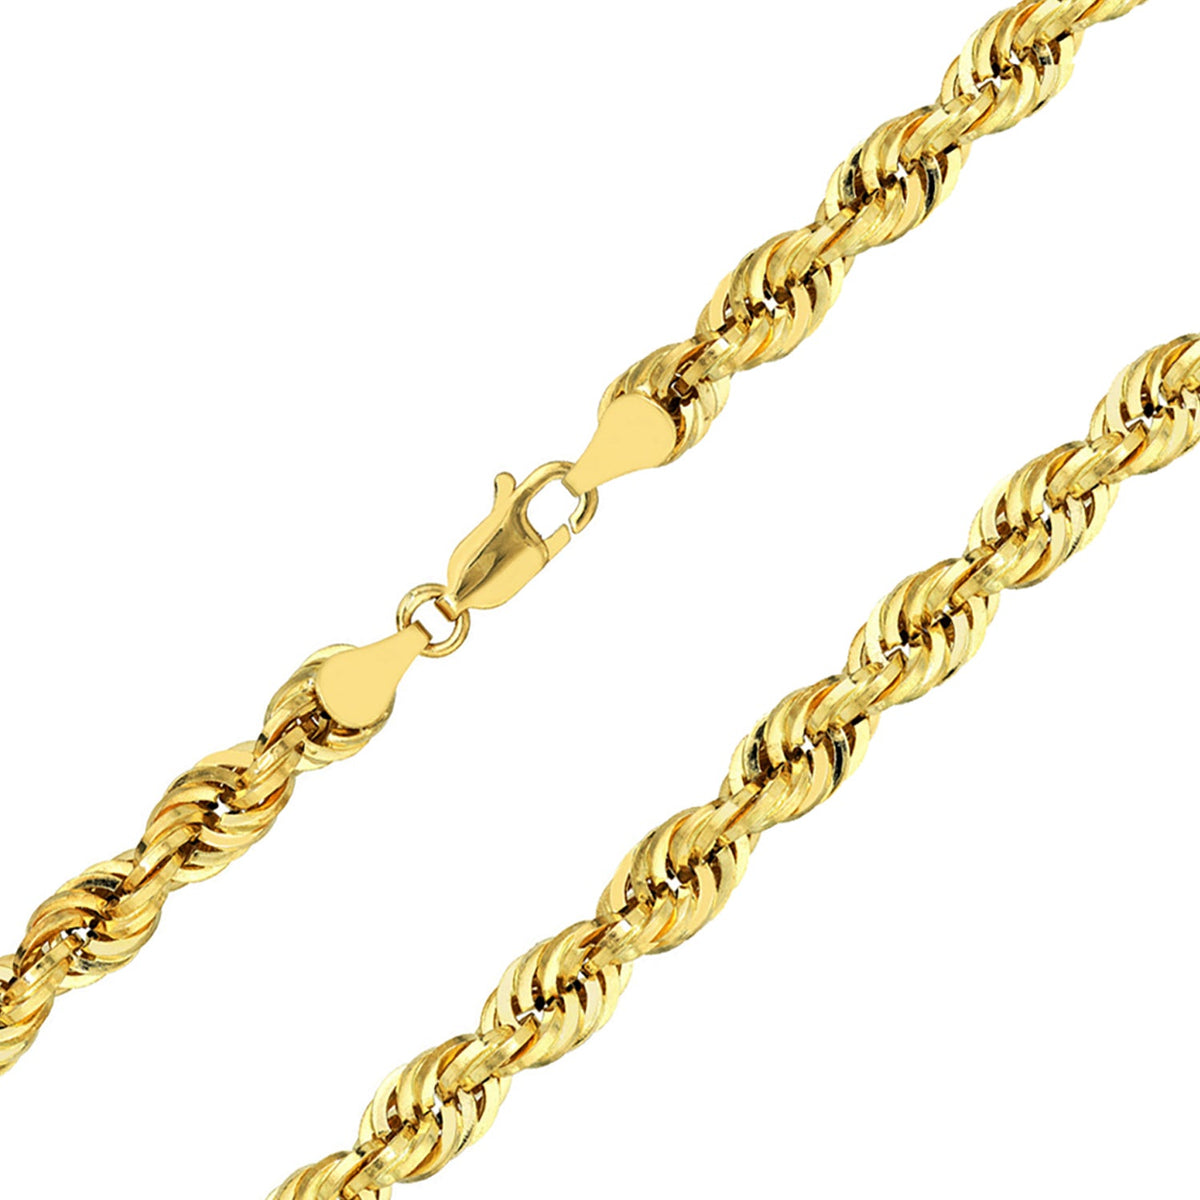 14k Yellow Gold Hollow 9mm Rope Chain Necklace with Lobster Lock - Light Rope Chain with Diamond Cut